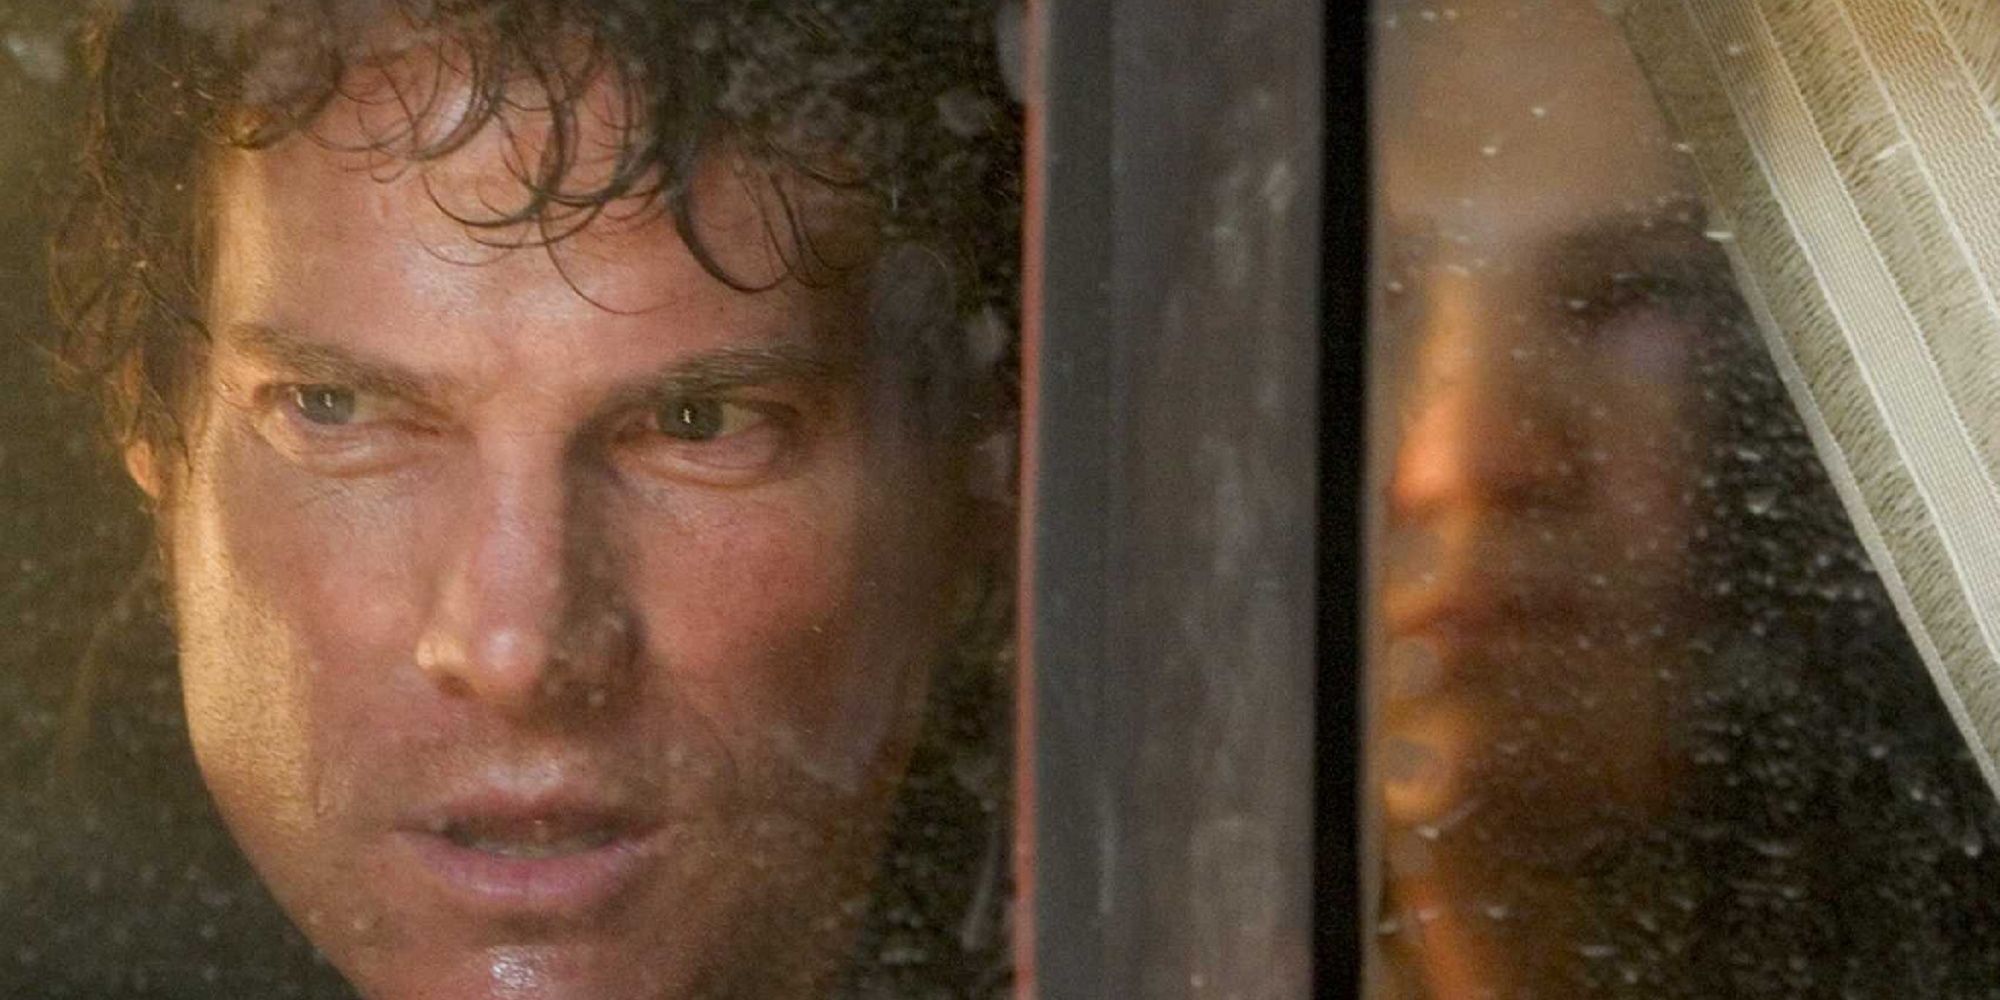 Bo looking out the window in 'House of Wax' with Vincent behind him, barely visible.